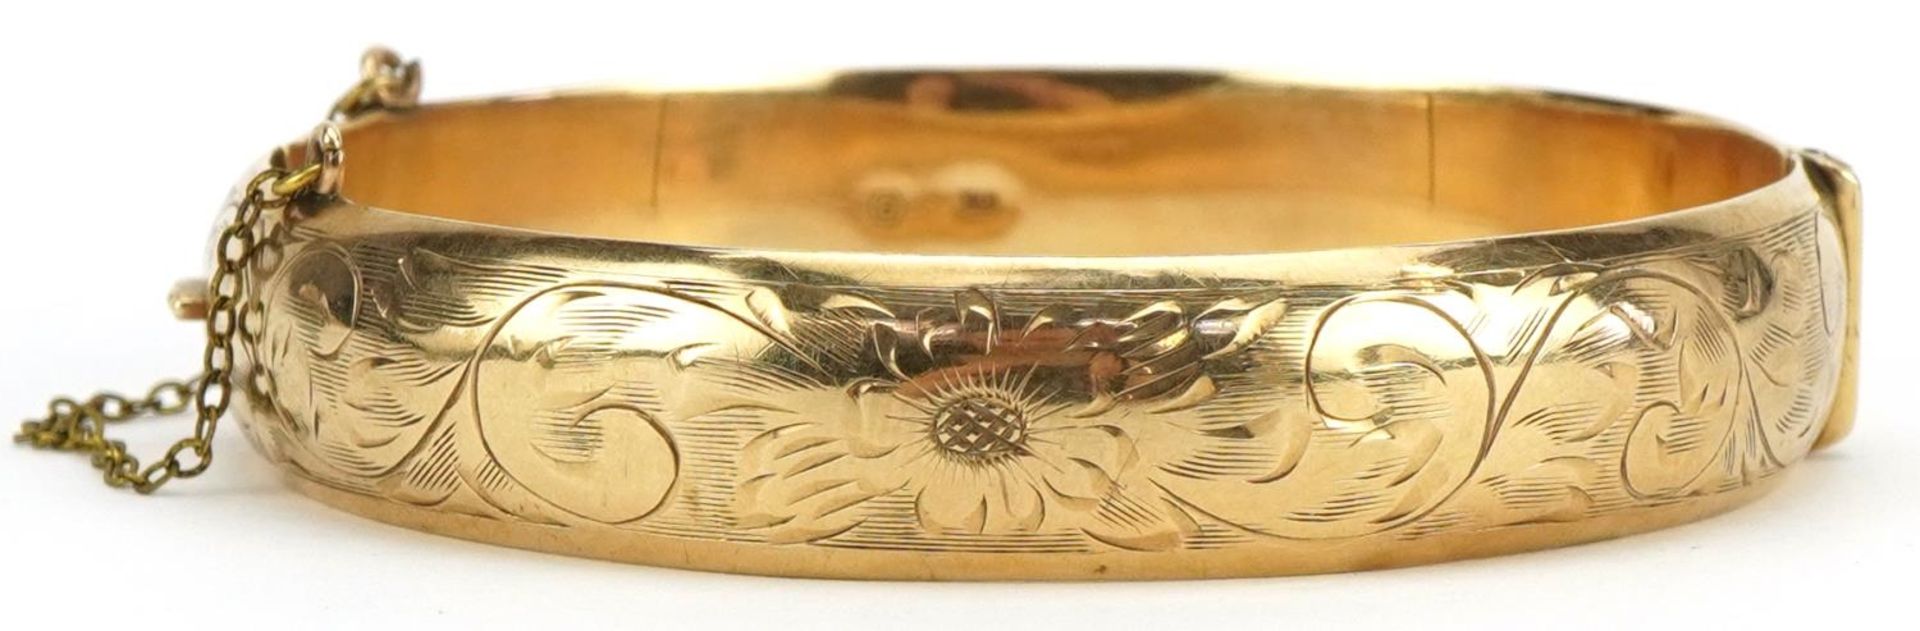 10ct gold hinged bangle engraved with flowers and foliage, 6cm in diameter, 17.7g : For further